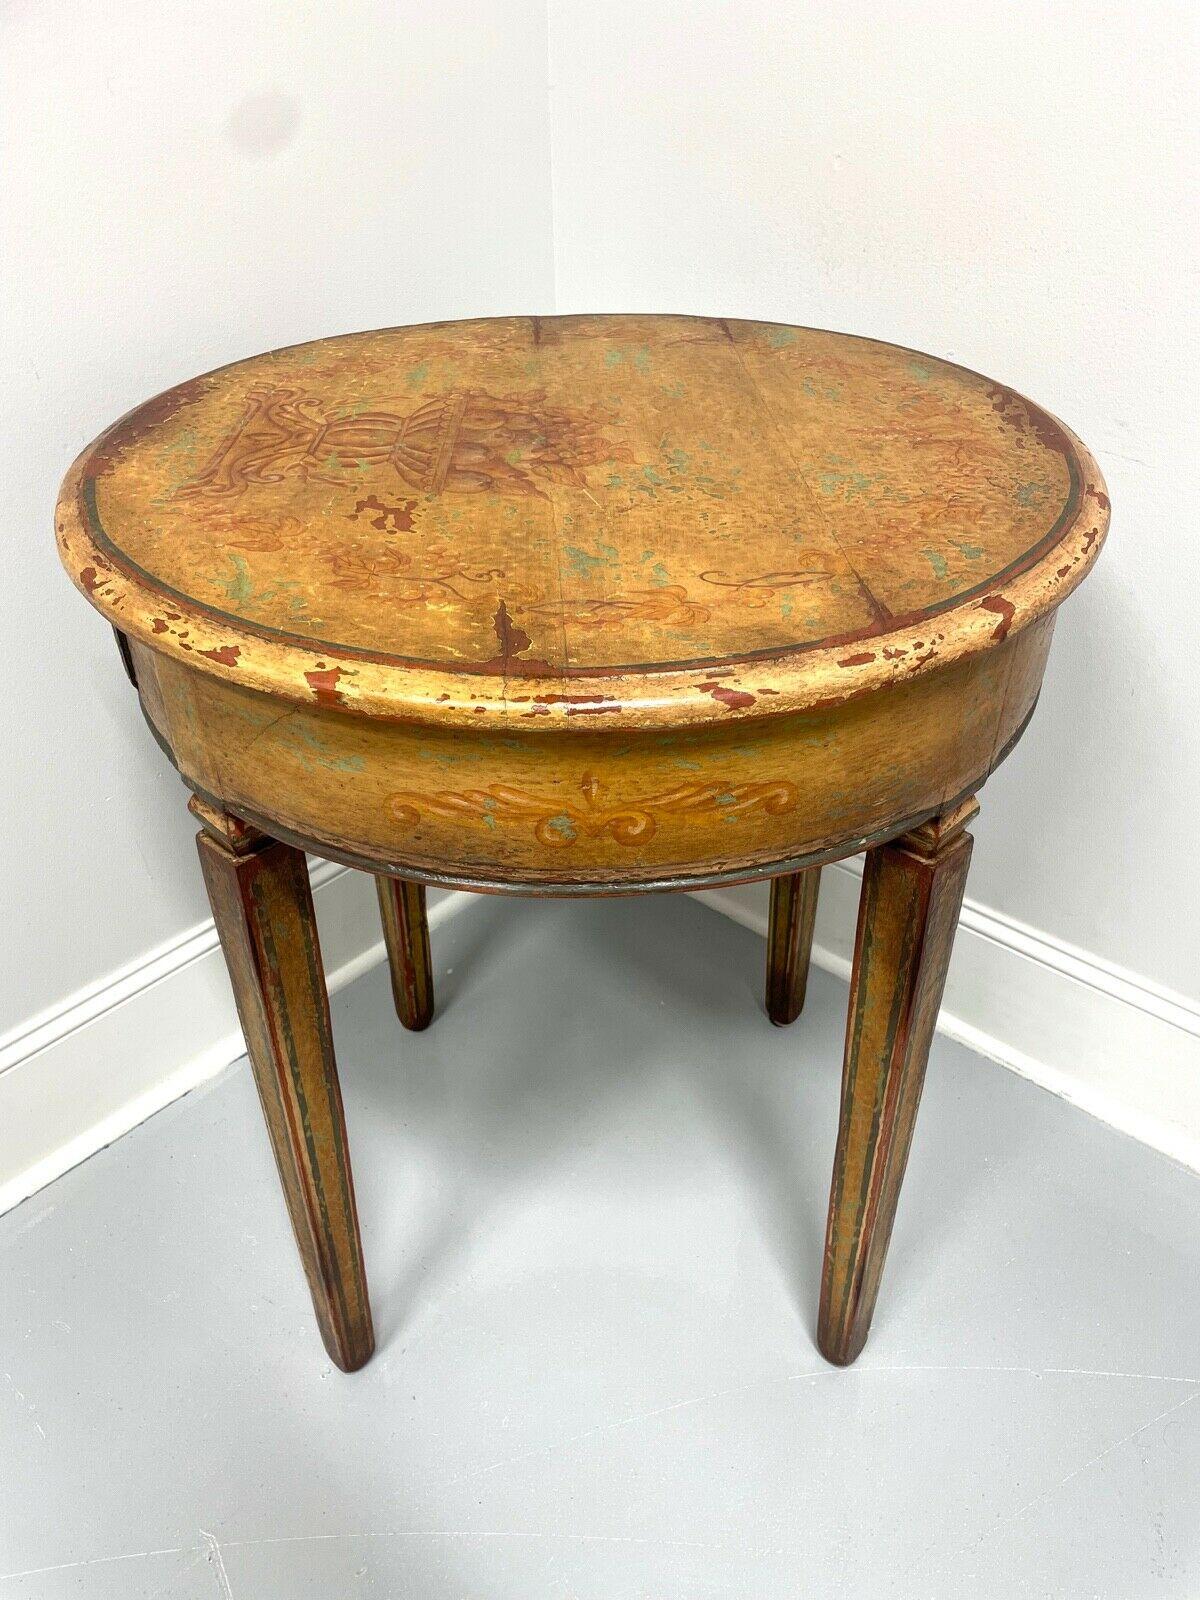 European Antique 18th Century Hand Painted Round Accent Table For Sale